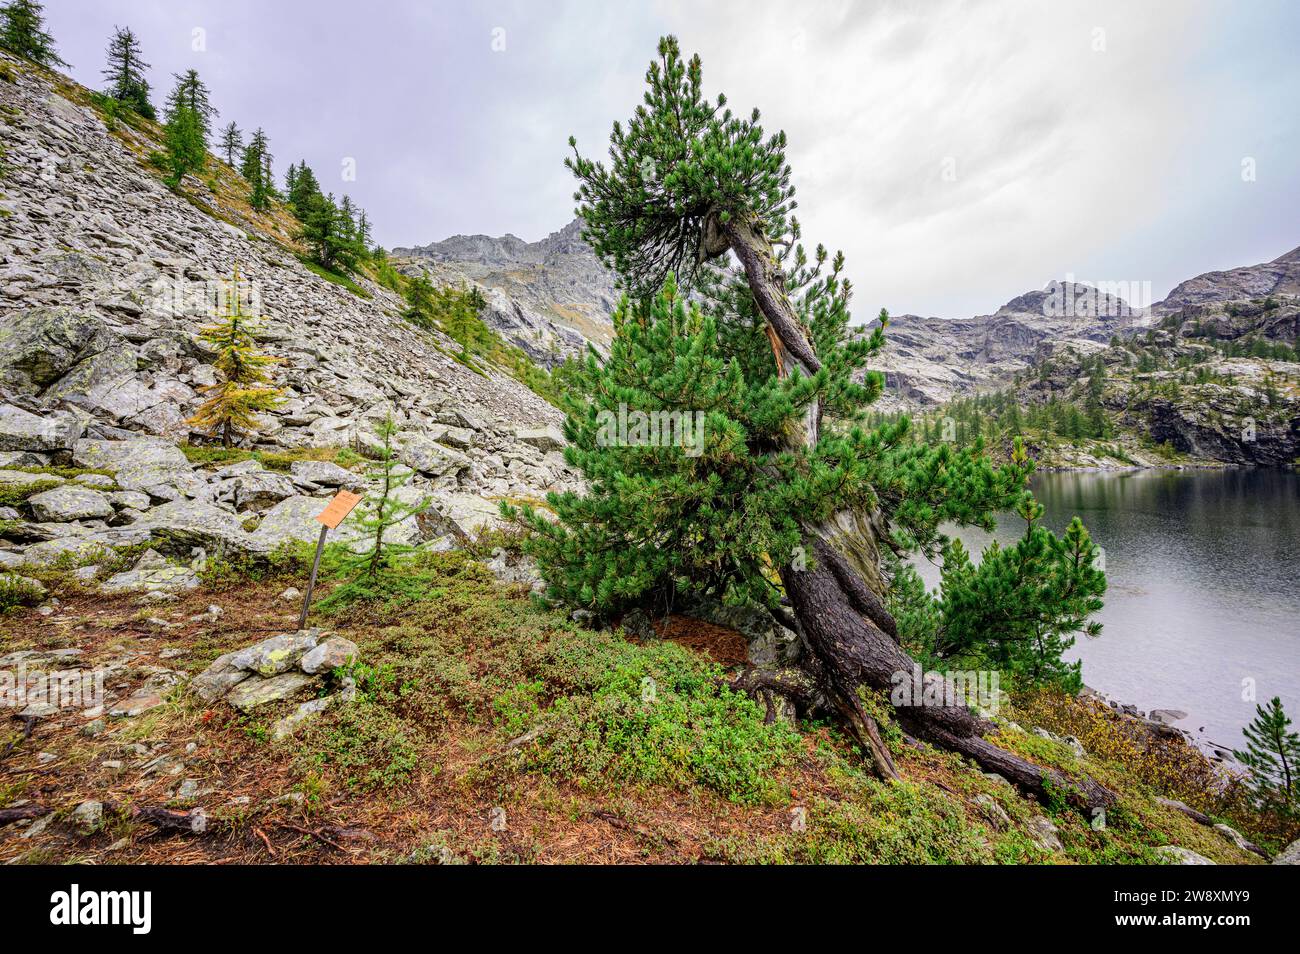 An approximately 300-year-old monumental Swiss pine in Mont Avic Natural Park, Valle d'Aosta, Italy. Stock Photo